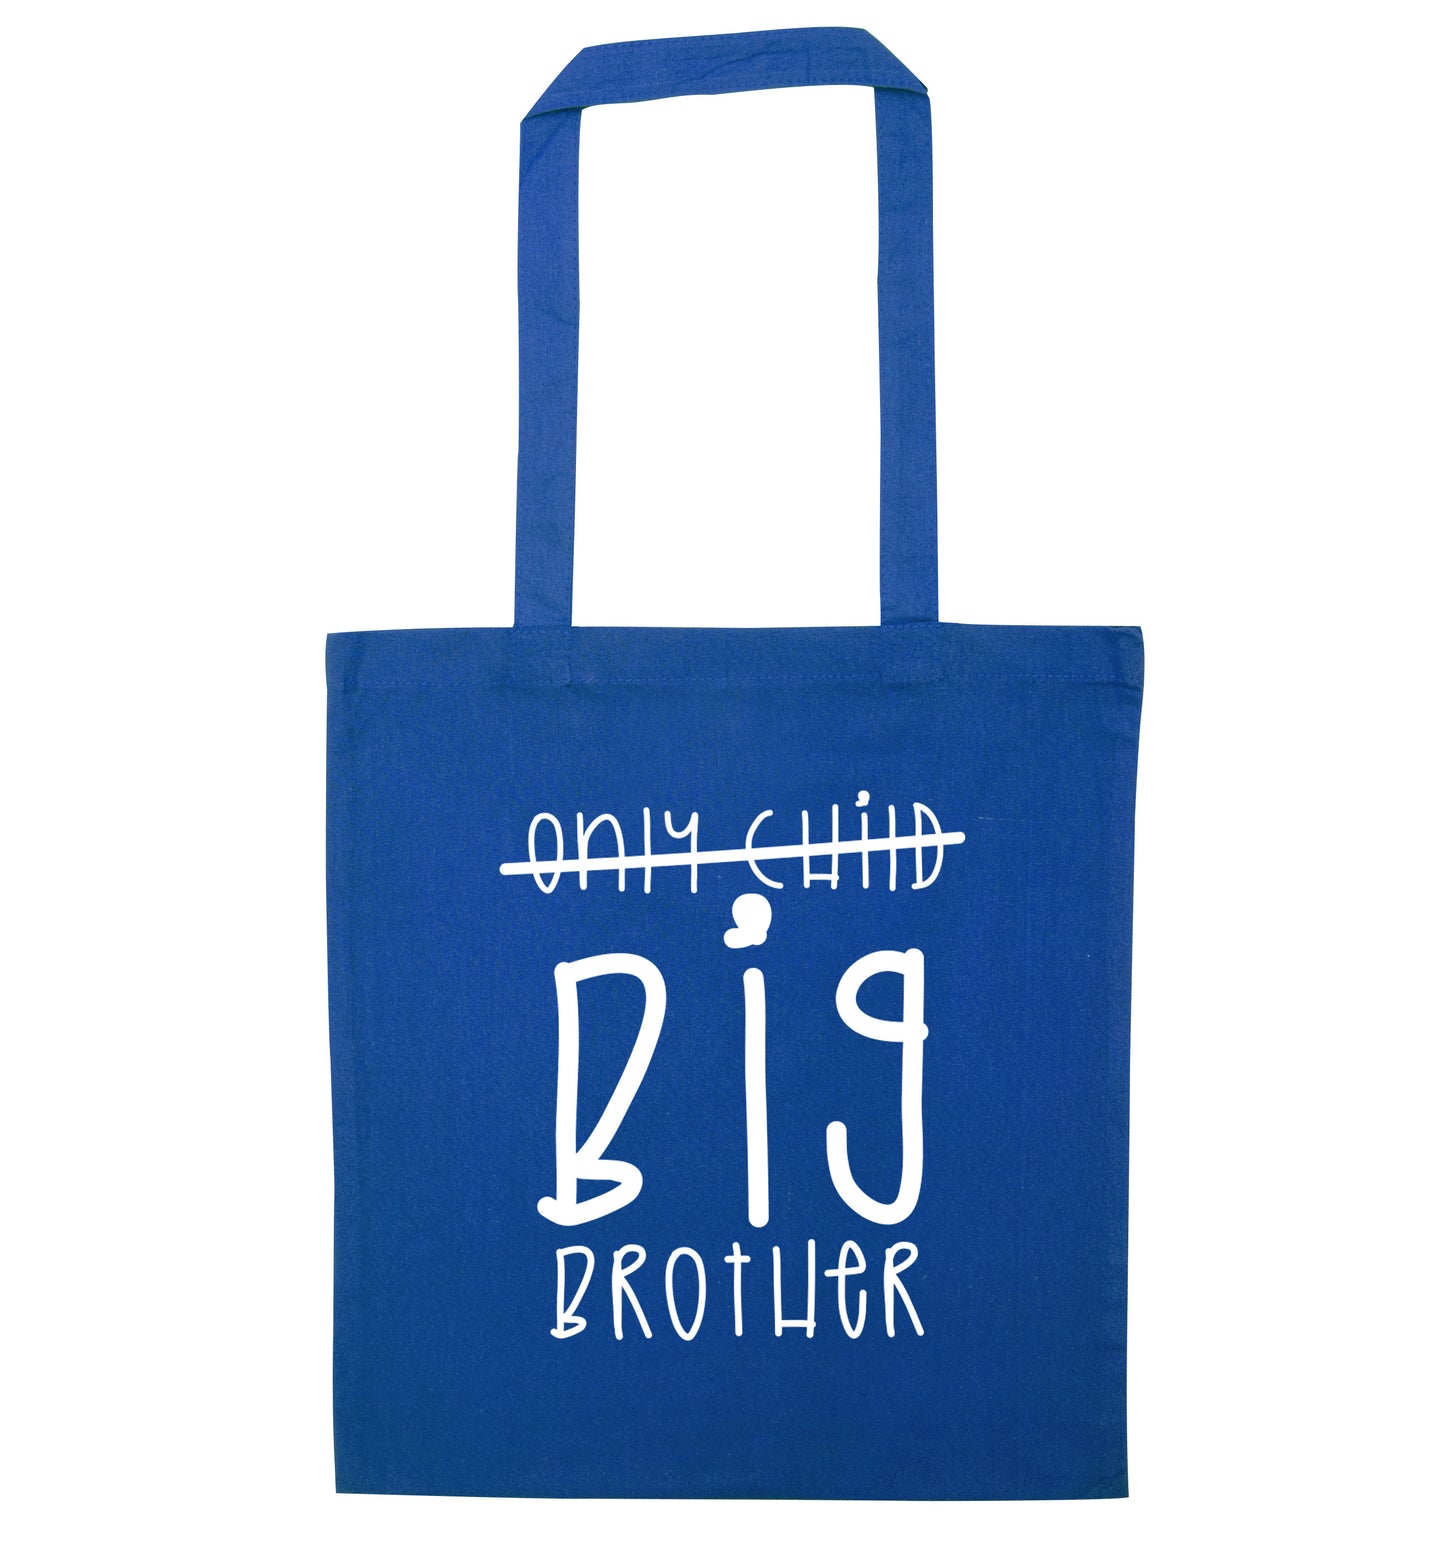 Only child big brother blue tote bag